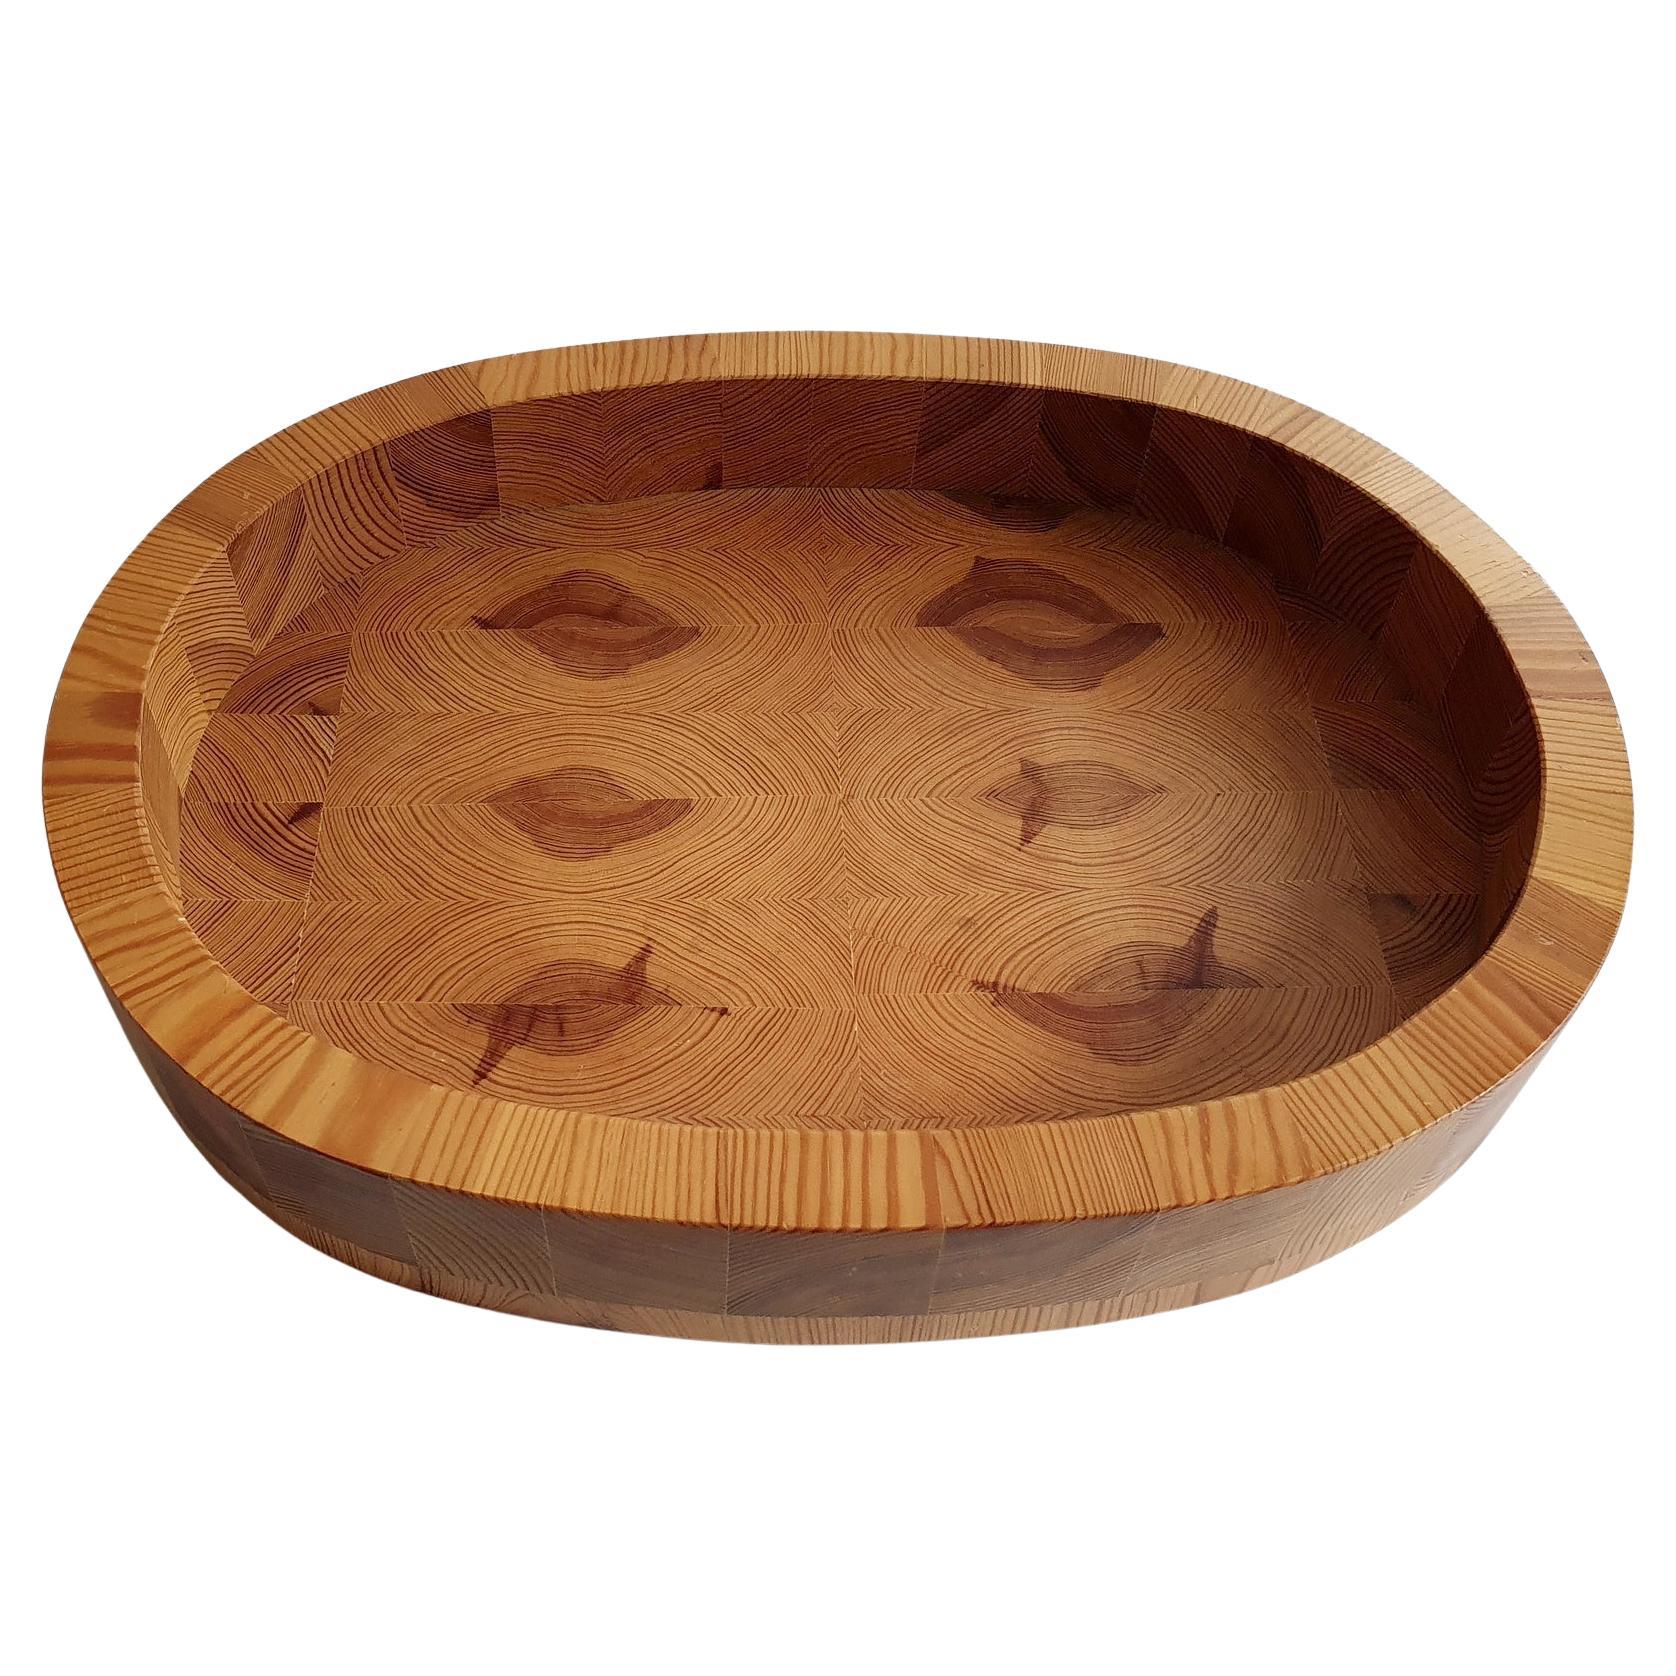 A large handcrafted oval bowl made from pine in Sweden during the early 1970s. In very good condition. Excellent for serving bread or fruit out of for instance. Well represents the Scandinavian Kinfolk Bohemian style and movement.